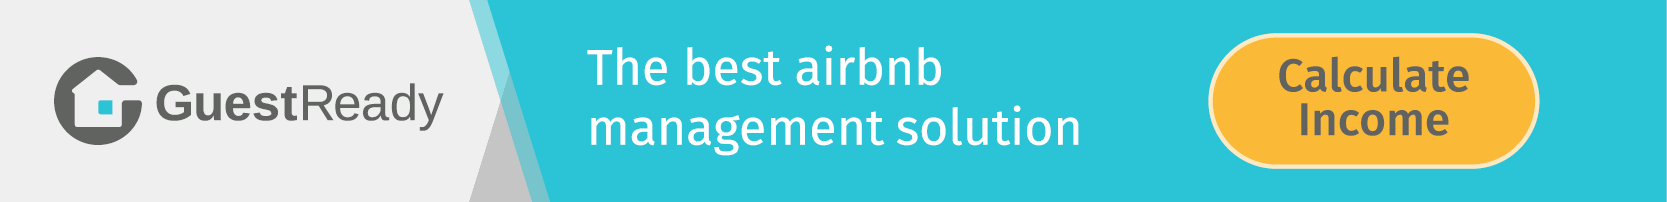 Airbnb Management Company GuestReady